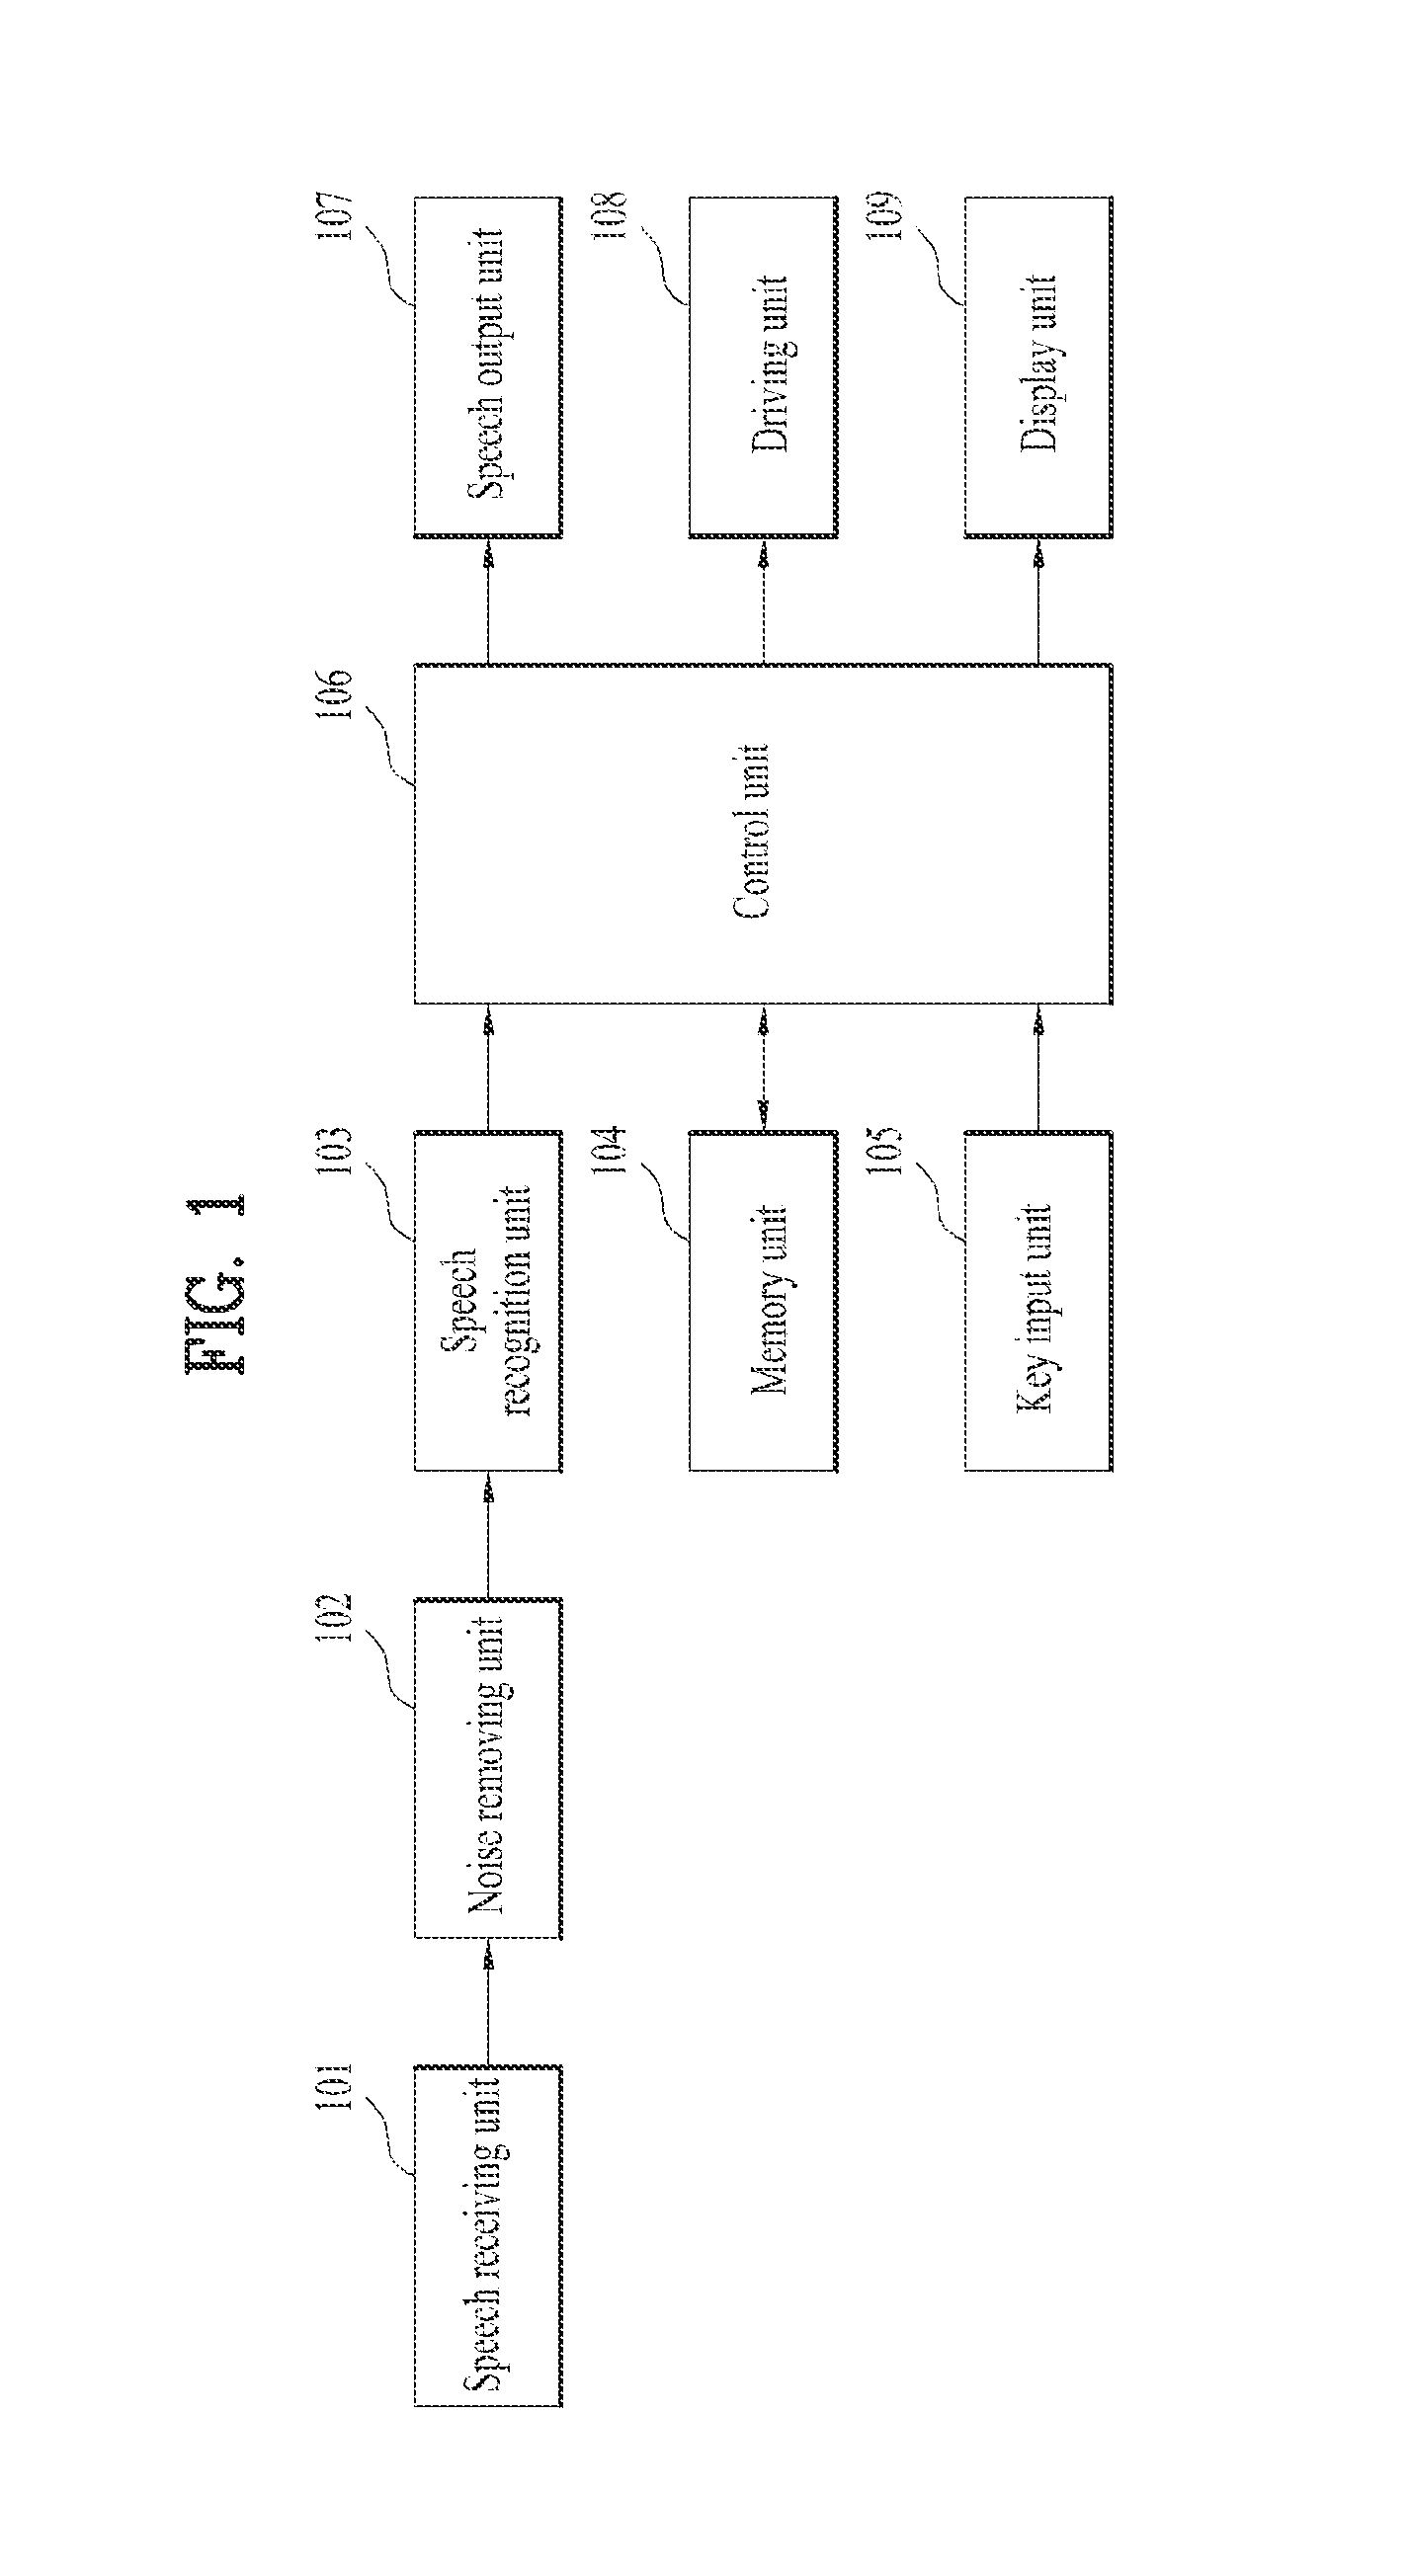 Apparatus and method for driving electric device using speech recognition